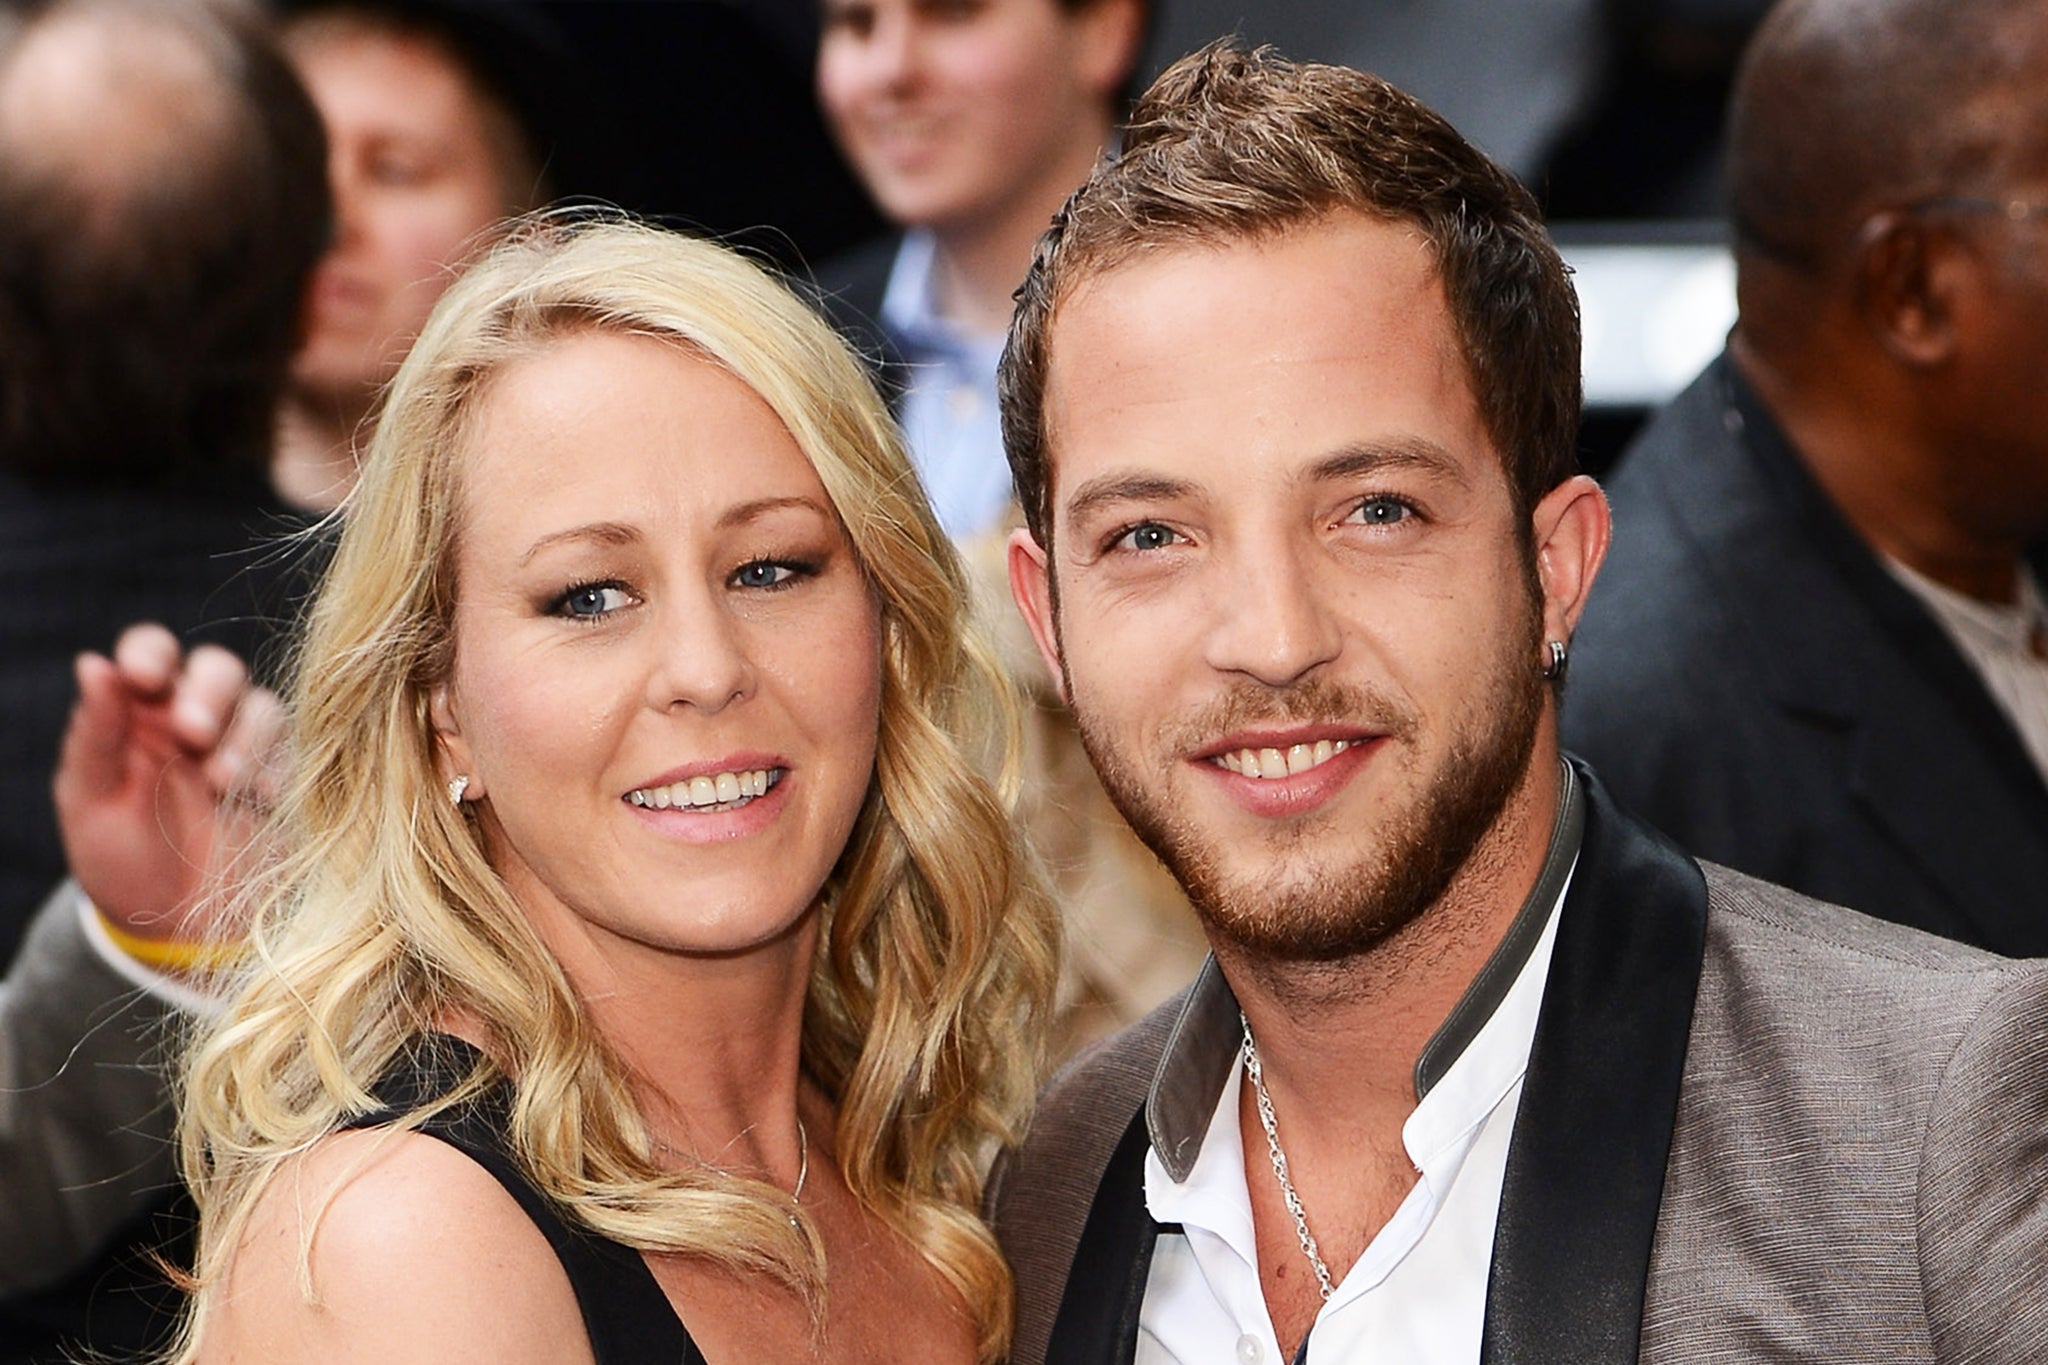 James Morrison's wife Gill Catchpole found dead at home | The Independent